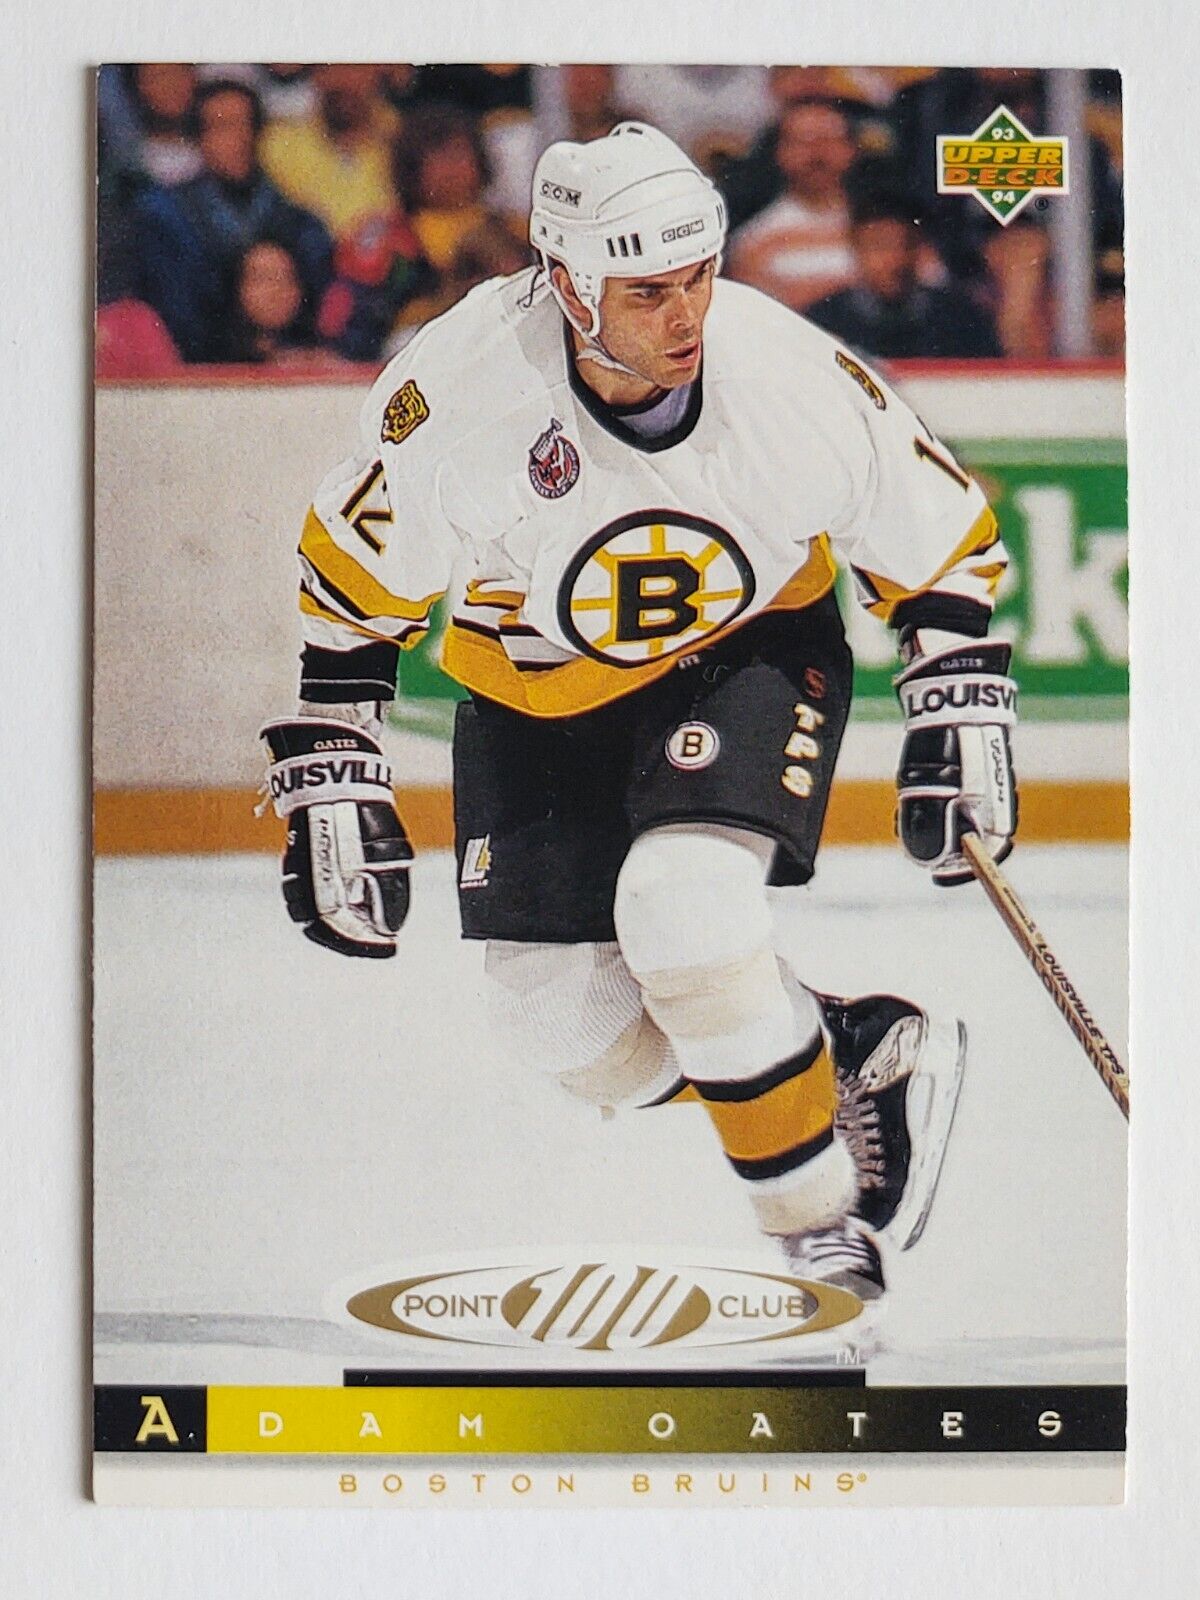 Adam Oates of the Boston Bruins skates on the ice during an NHL game